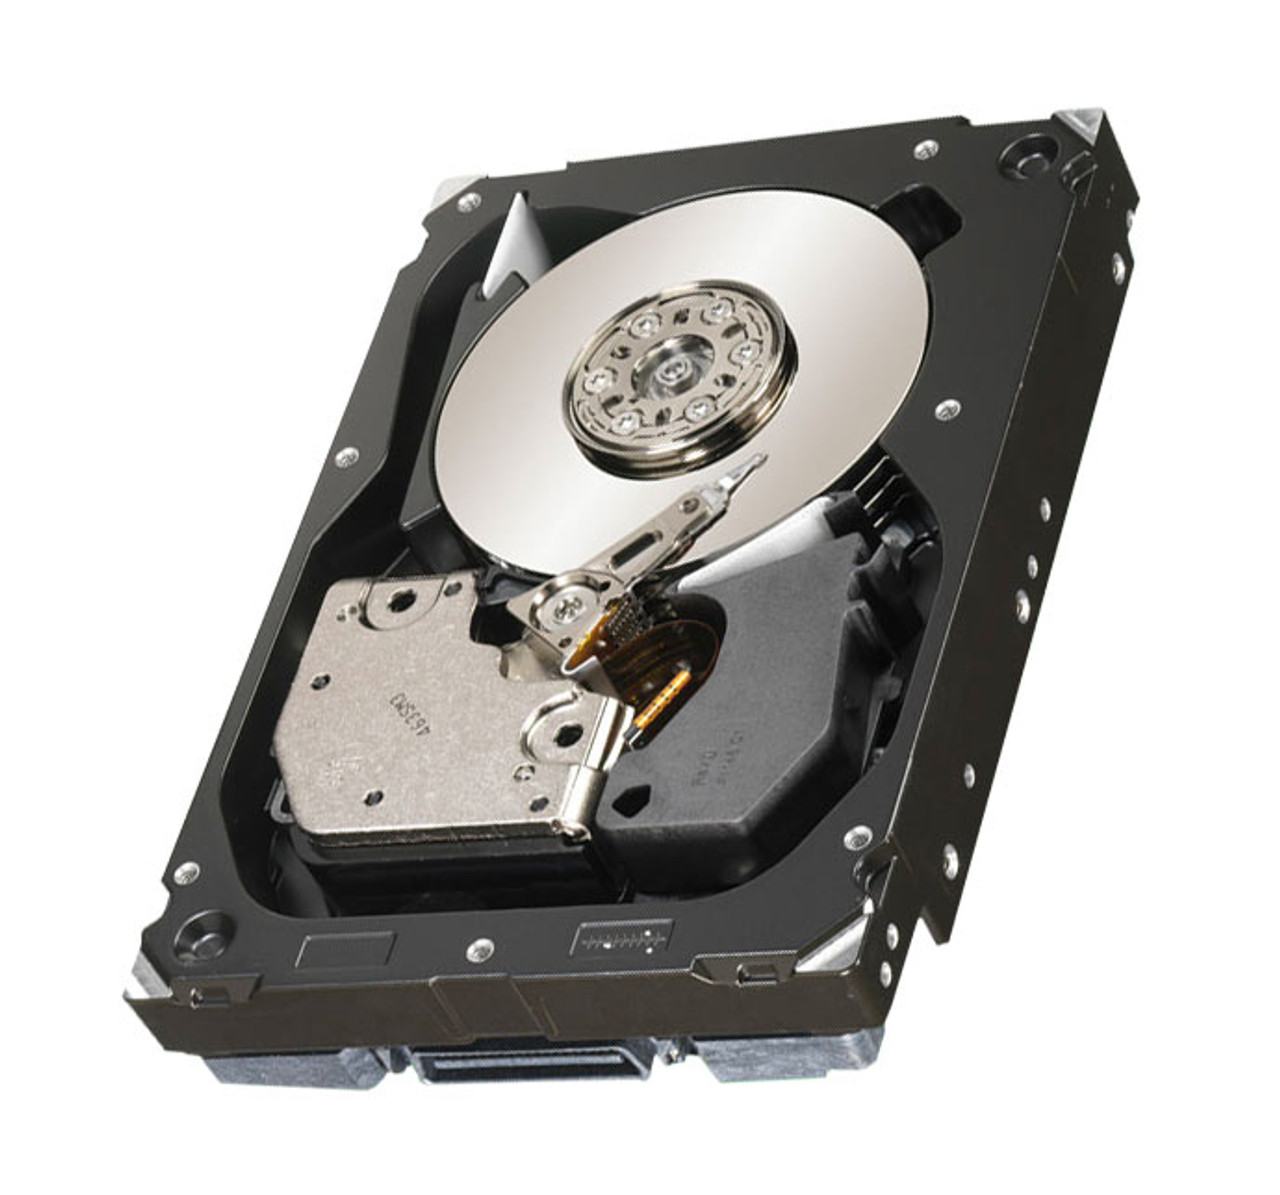 40K6819 - IBM 73.4GB 15000RPM Fibre Channel 4Gbps E-DDM 3.5-inch Hard Drive with Tray for TotalStorage DS4700